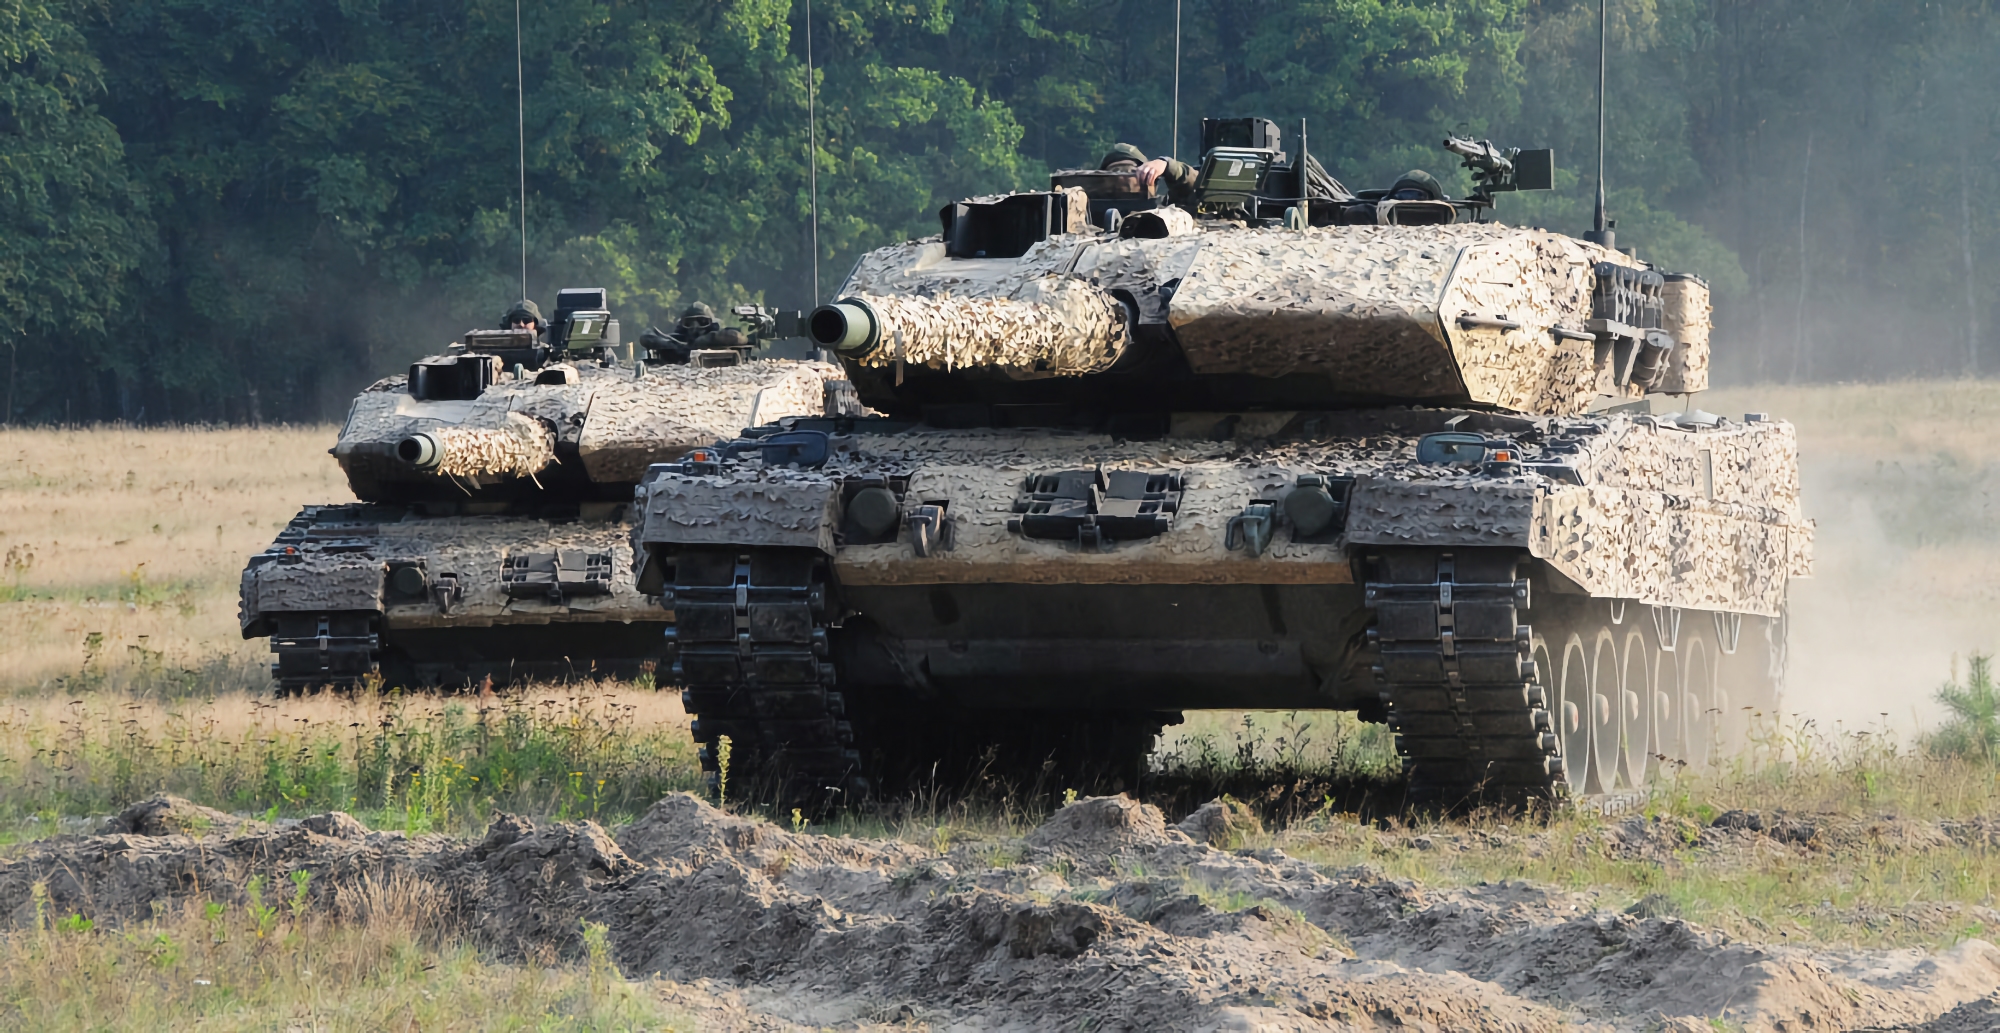 German defence ministry confirms transfer of 18 Leopard 2A6 tanks and 40 Marder BMPs to Ukraine